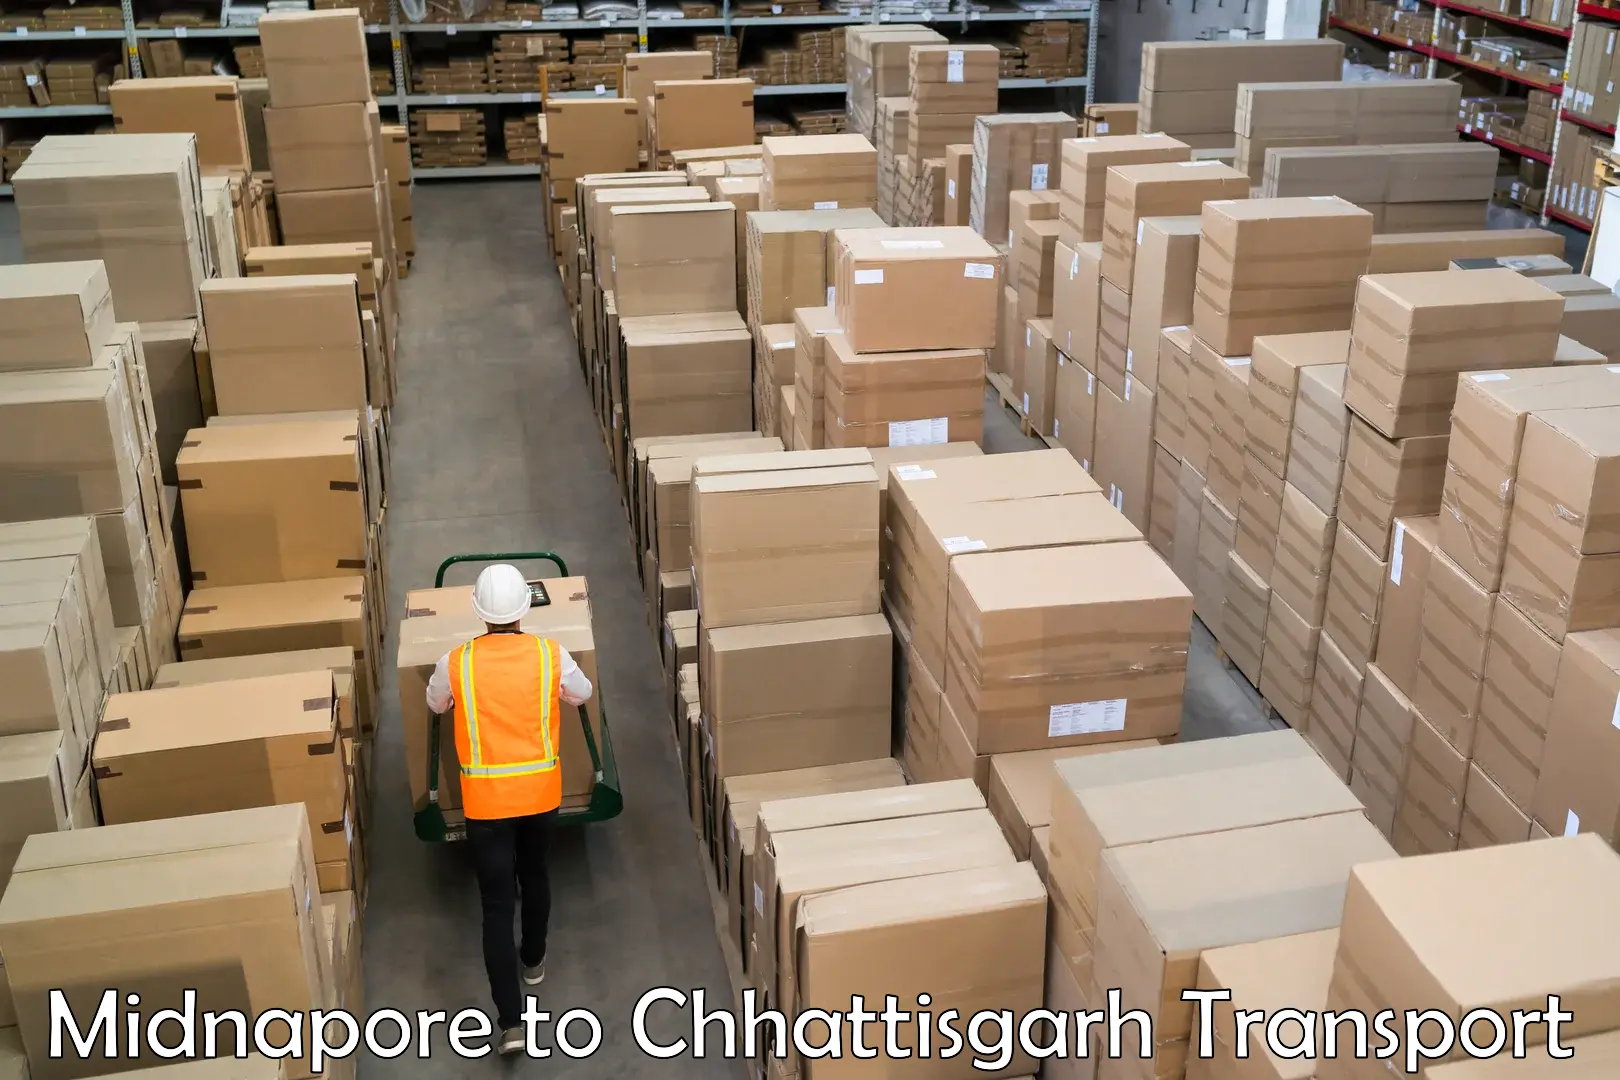 Daily parcel service transport in Midnapore to Abhanpur